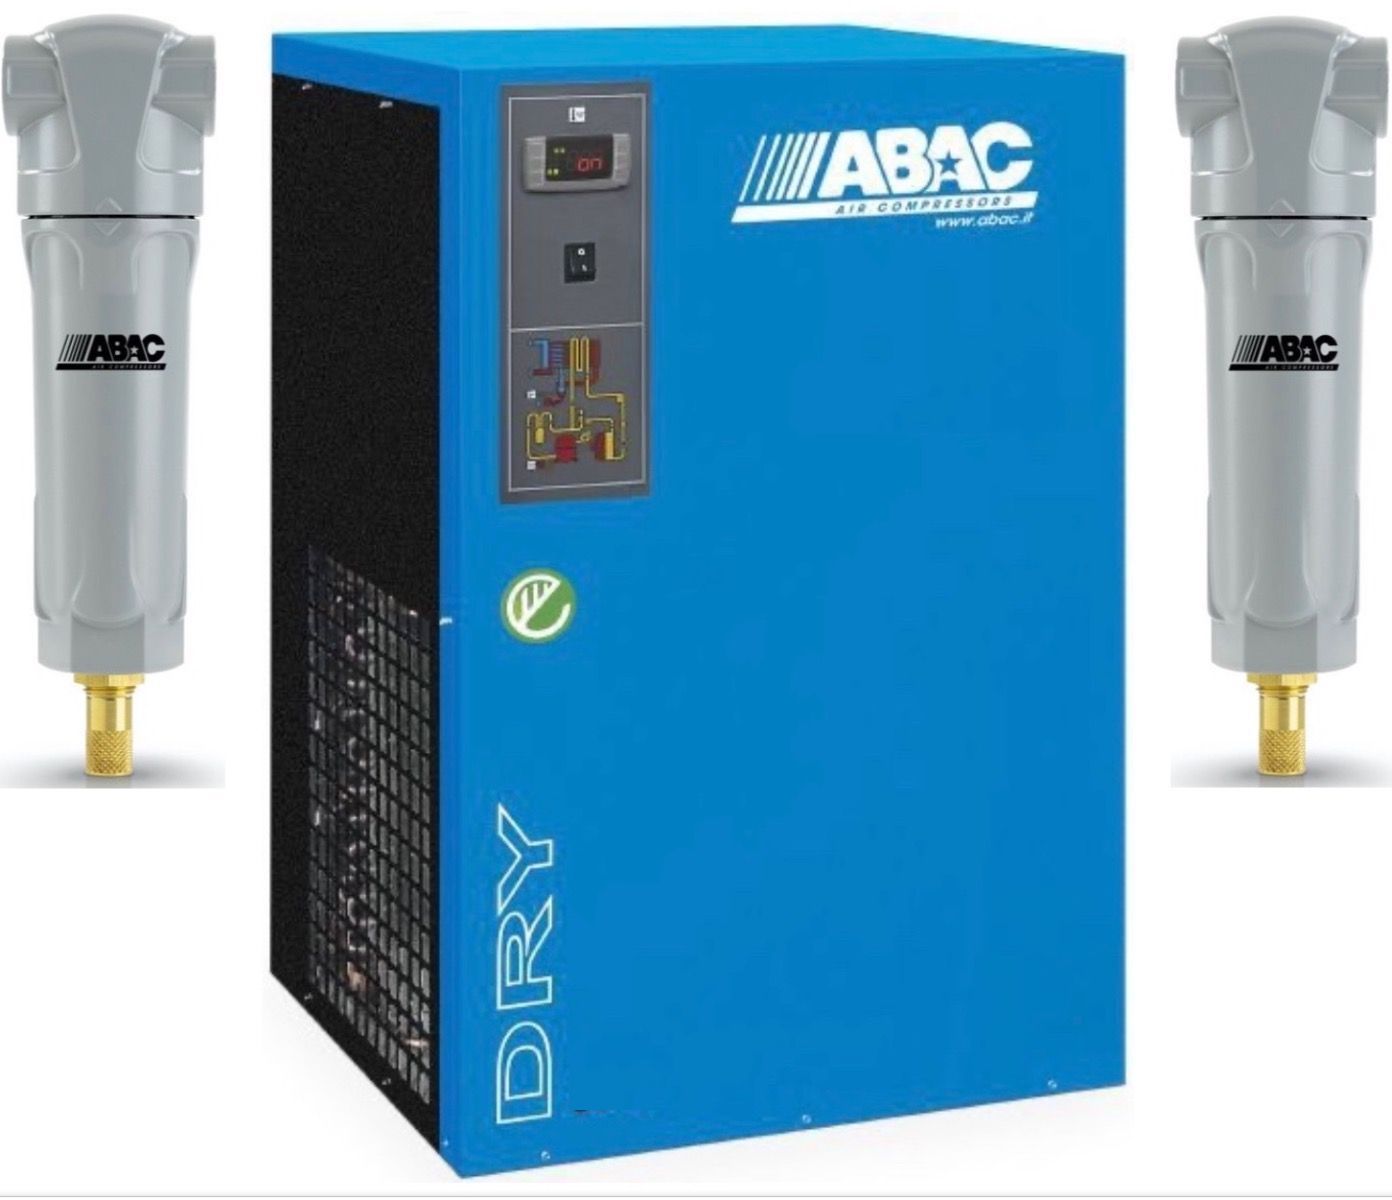 Abac Dry 290 181 Cfm Refrigerated Dryer - 4102005406 + 2 X Filters Compressed Air